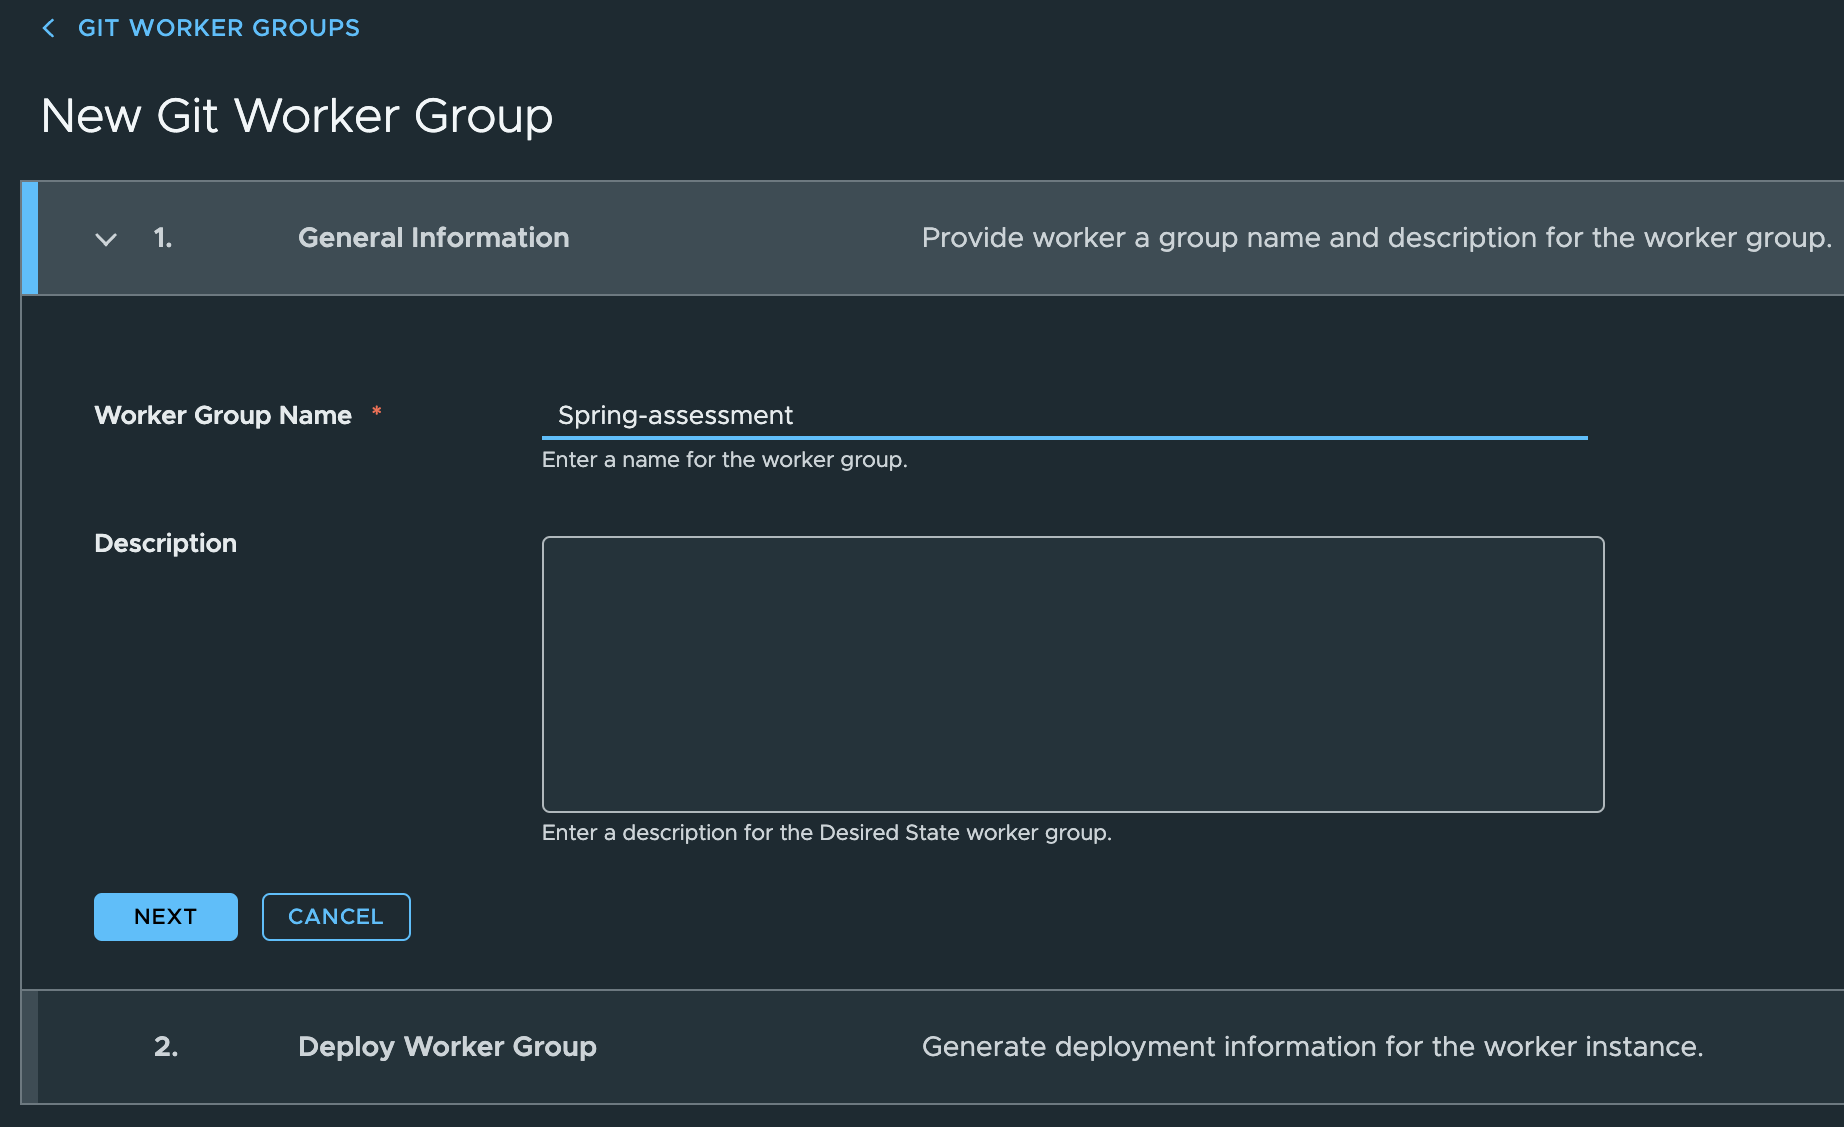 Create a new Git Worker Group